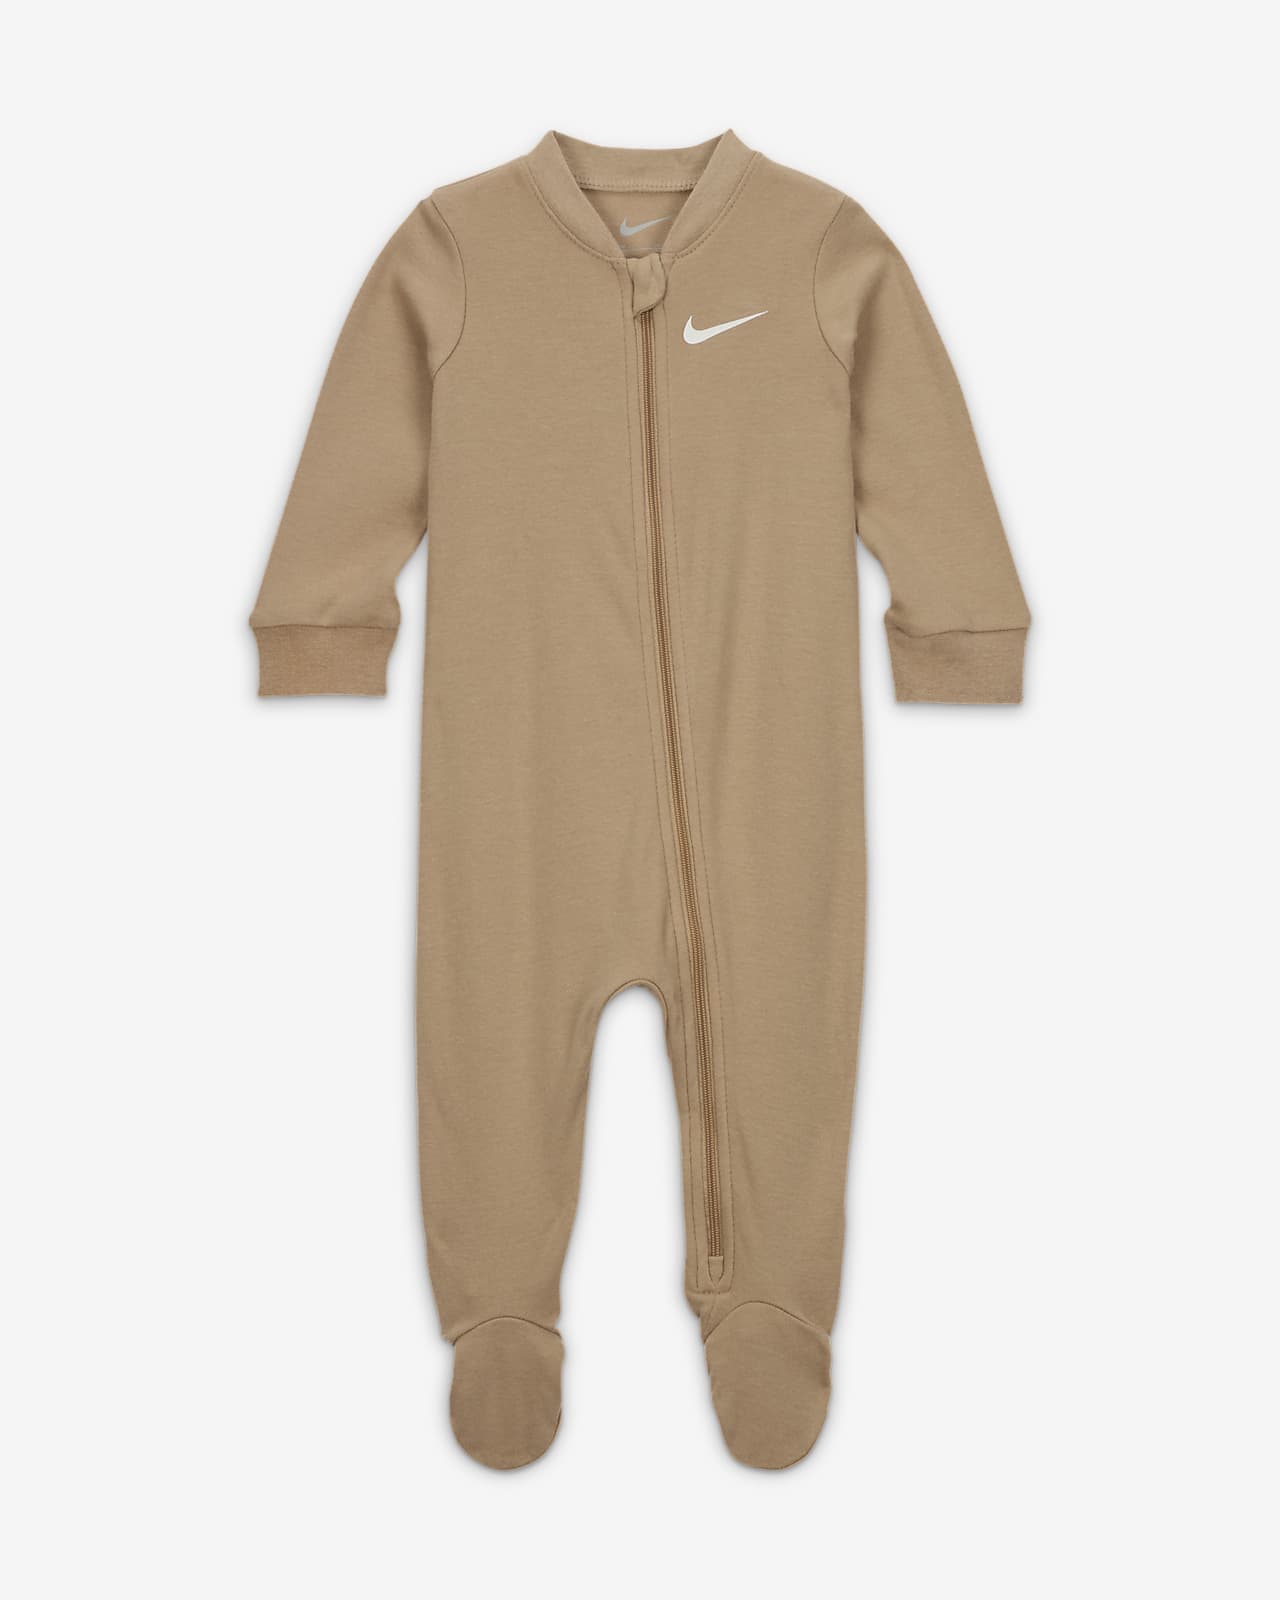 Nike Essentials Footed Coverall Baby Coverall.